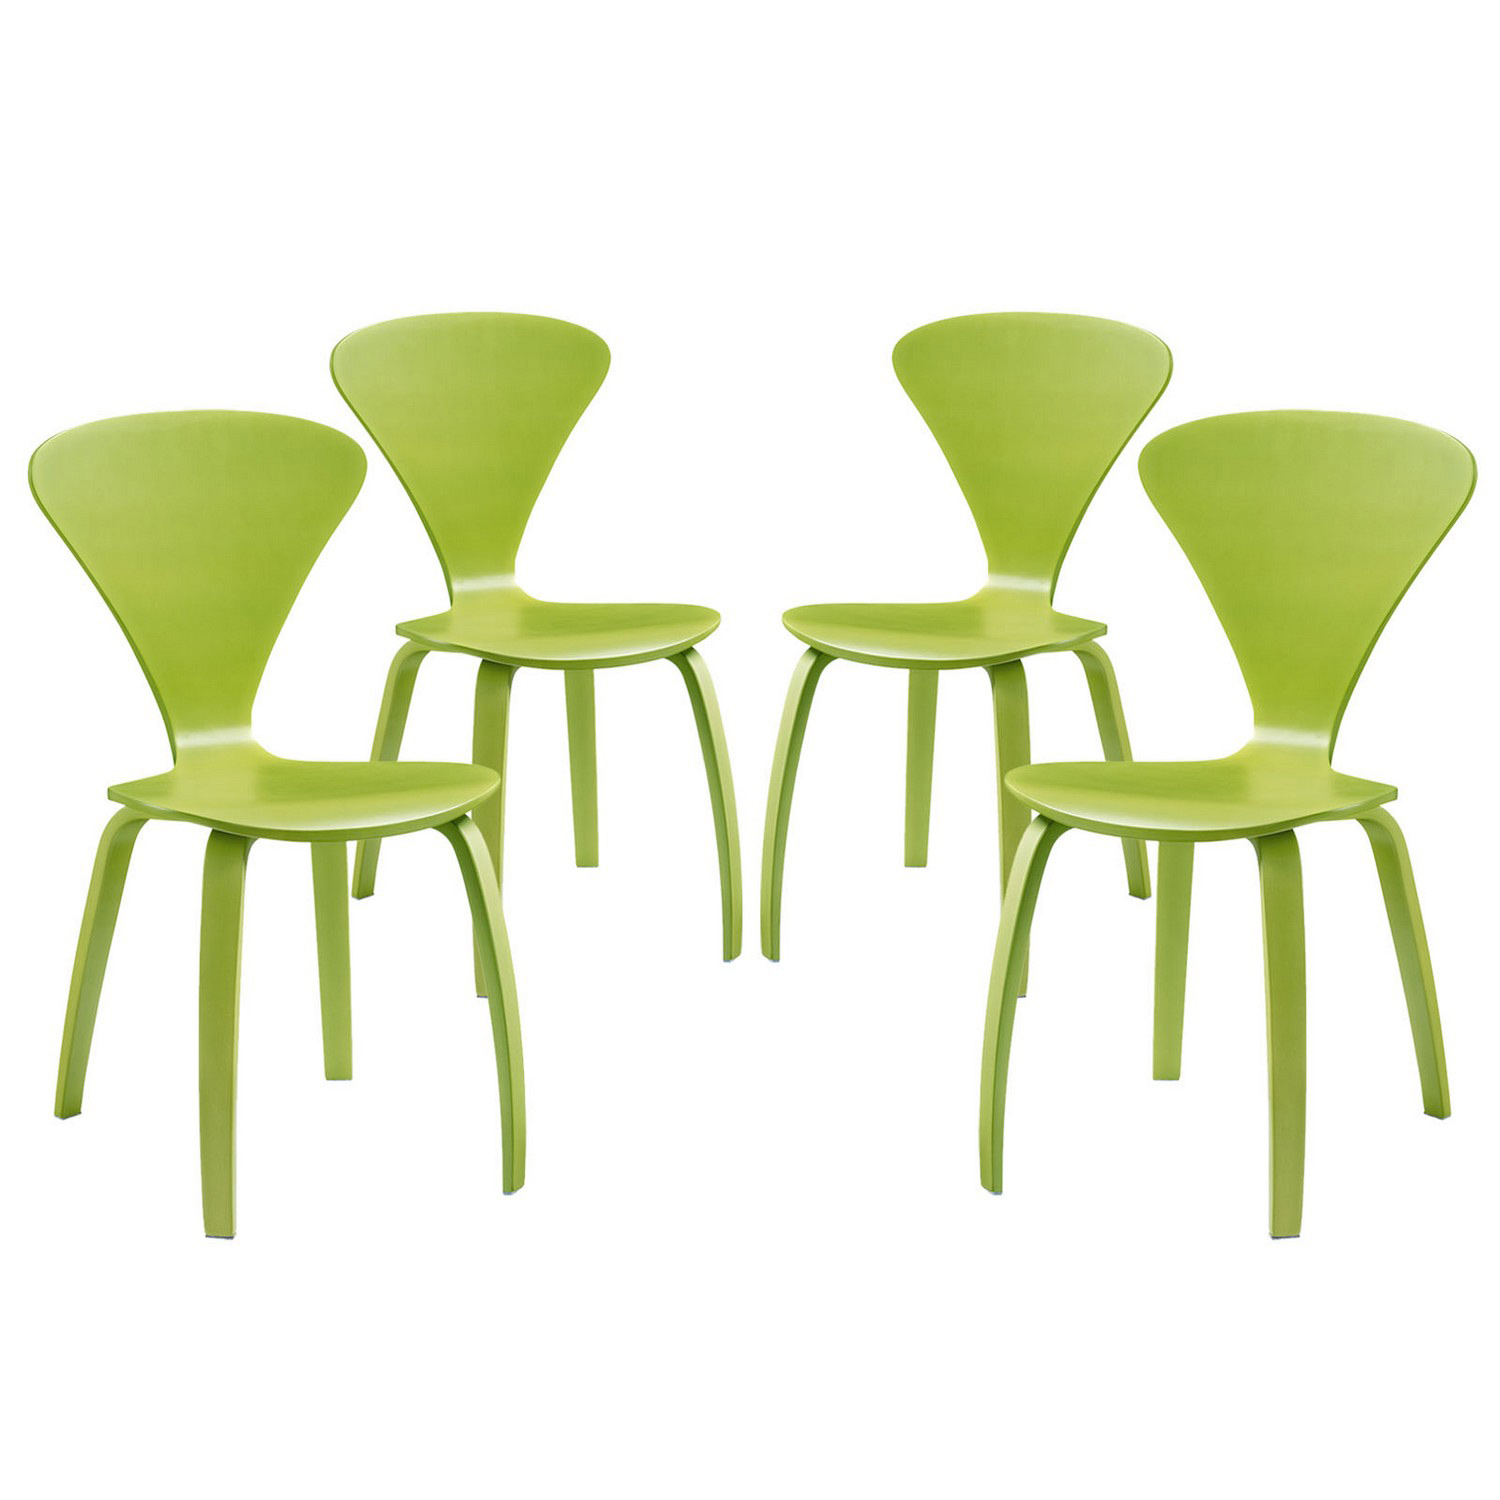 Modway Vortex Dining Chairs Set of 4 - Green